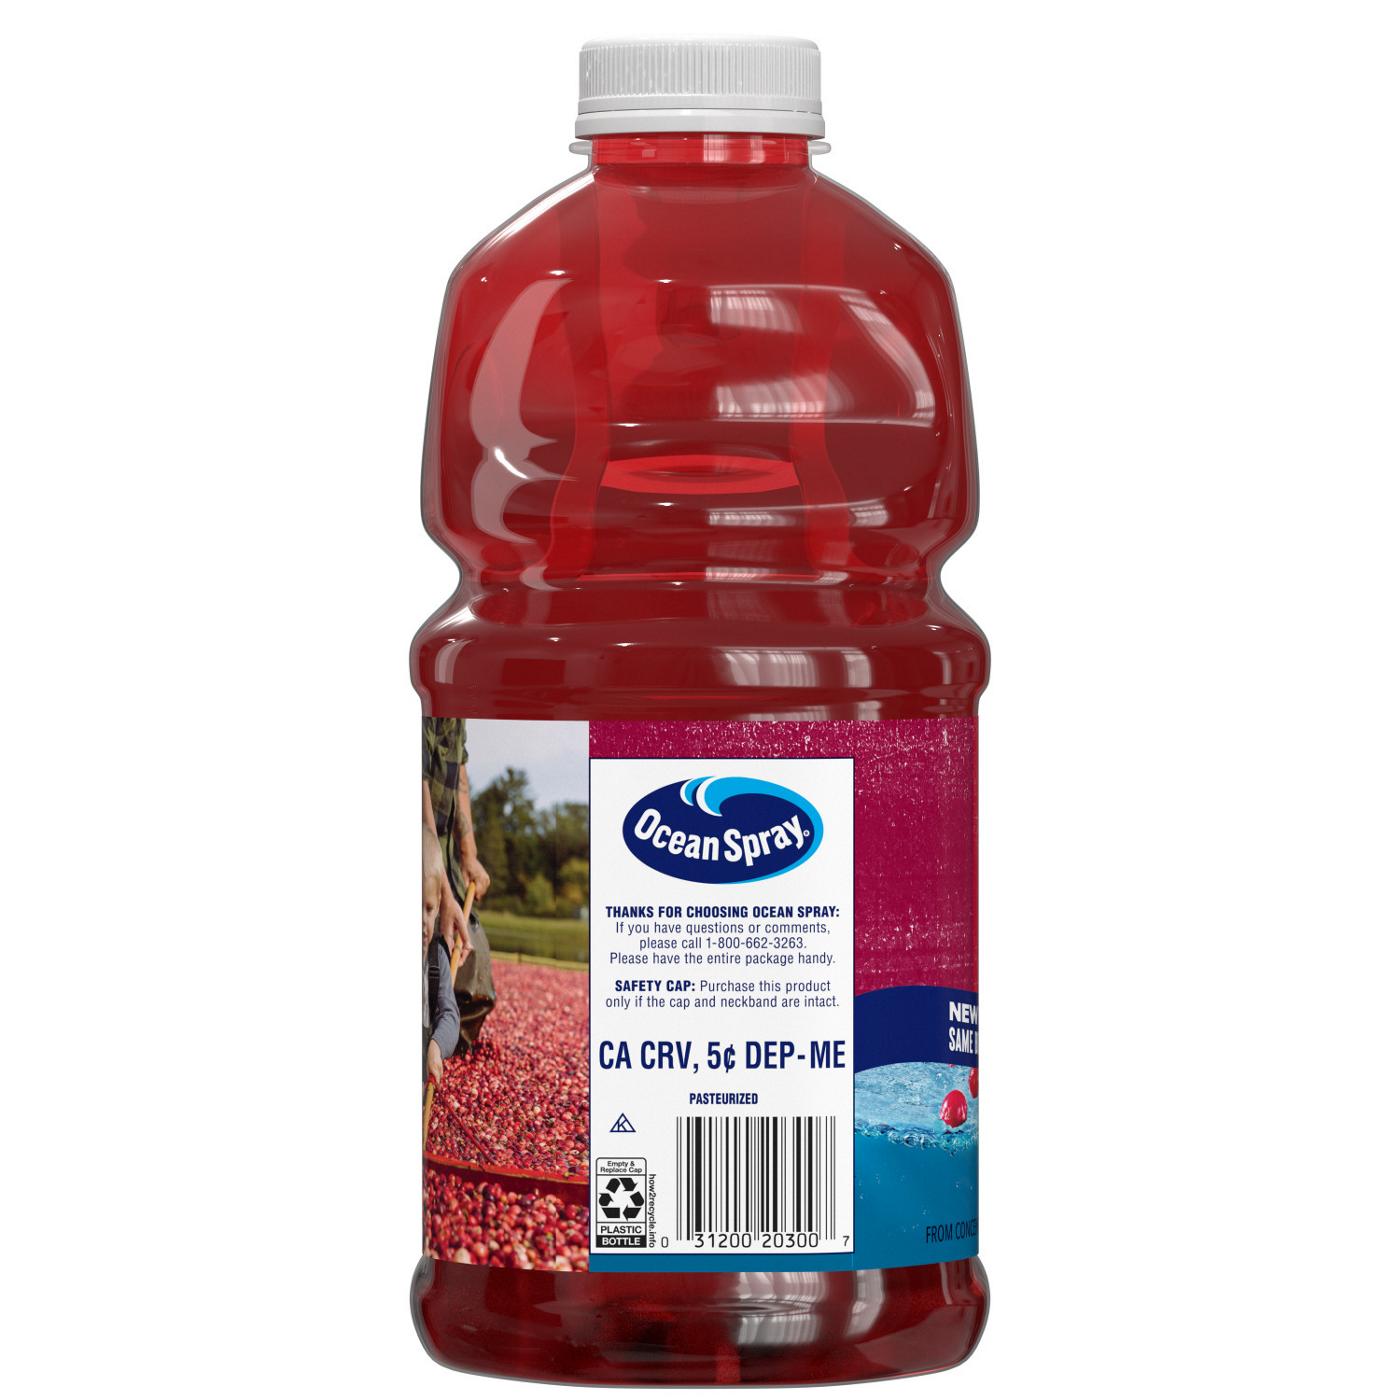 Ocean Spray Cranberry Juice Cocktail; image 6 of 6